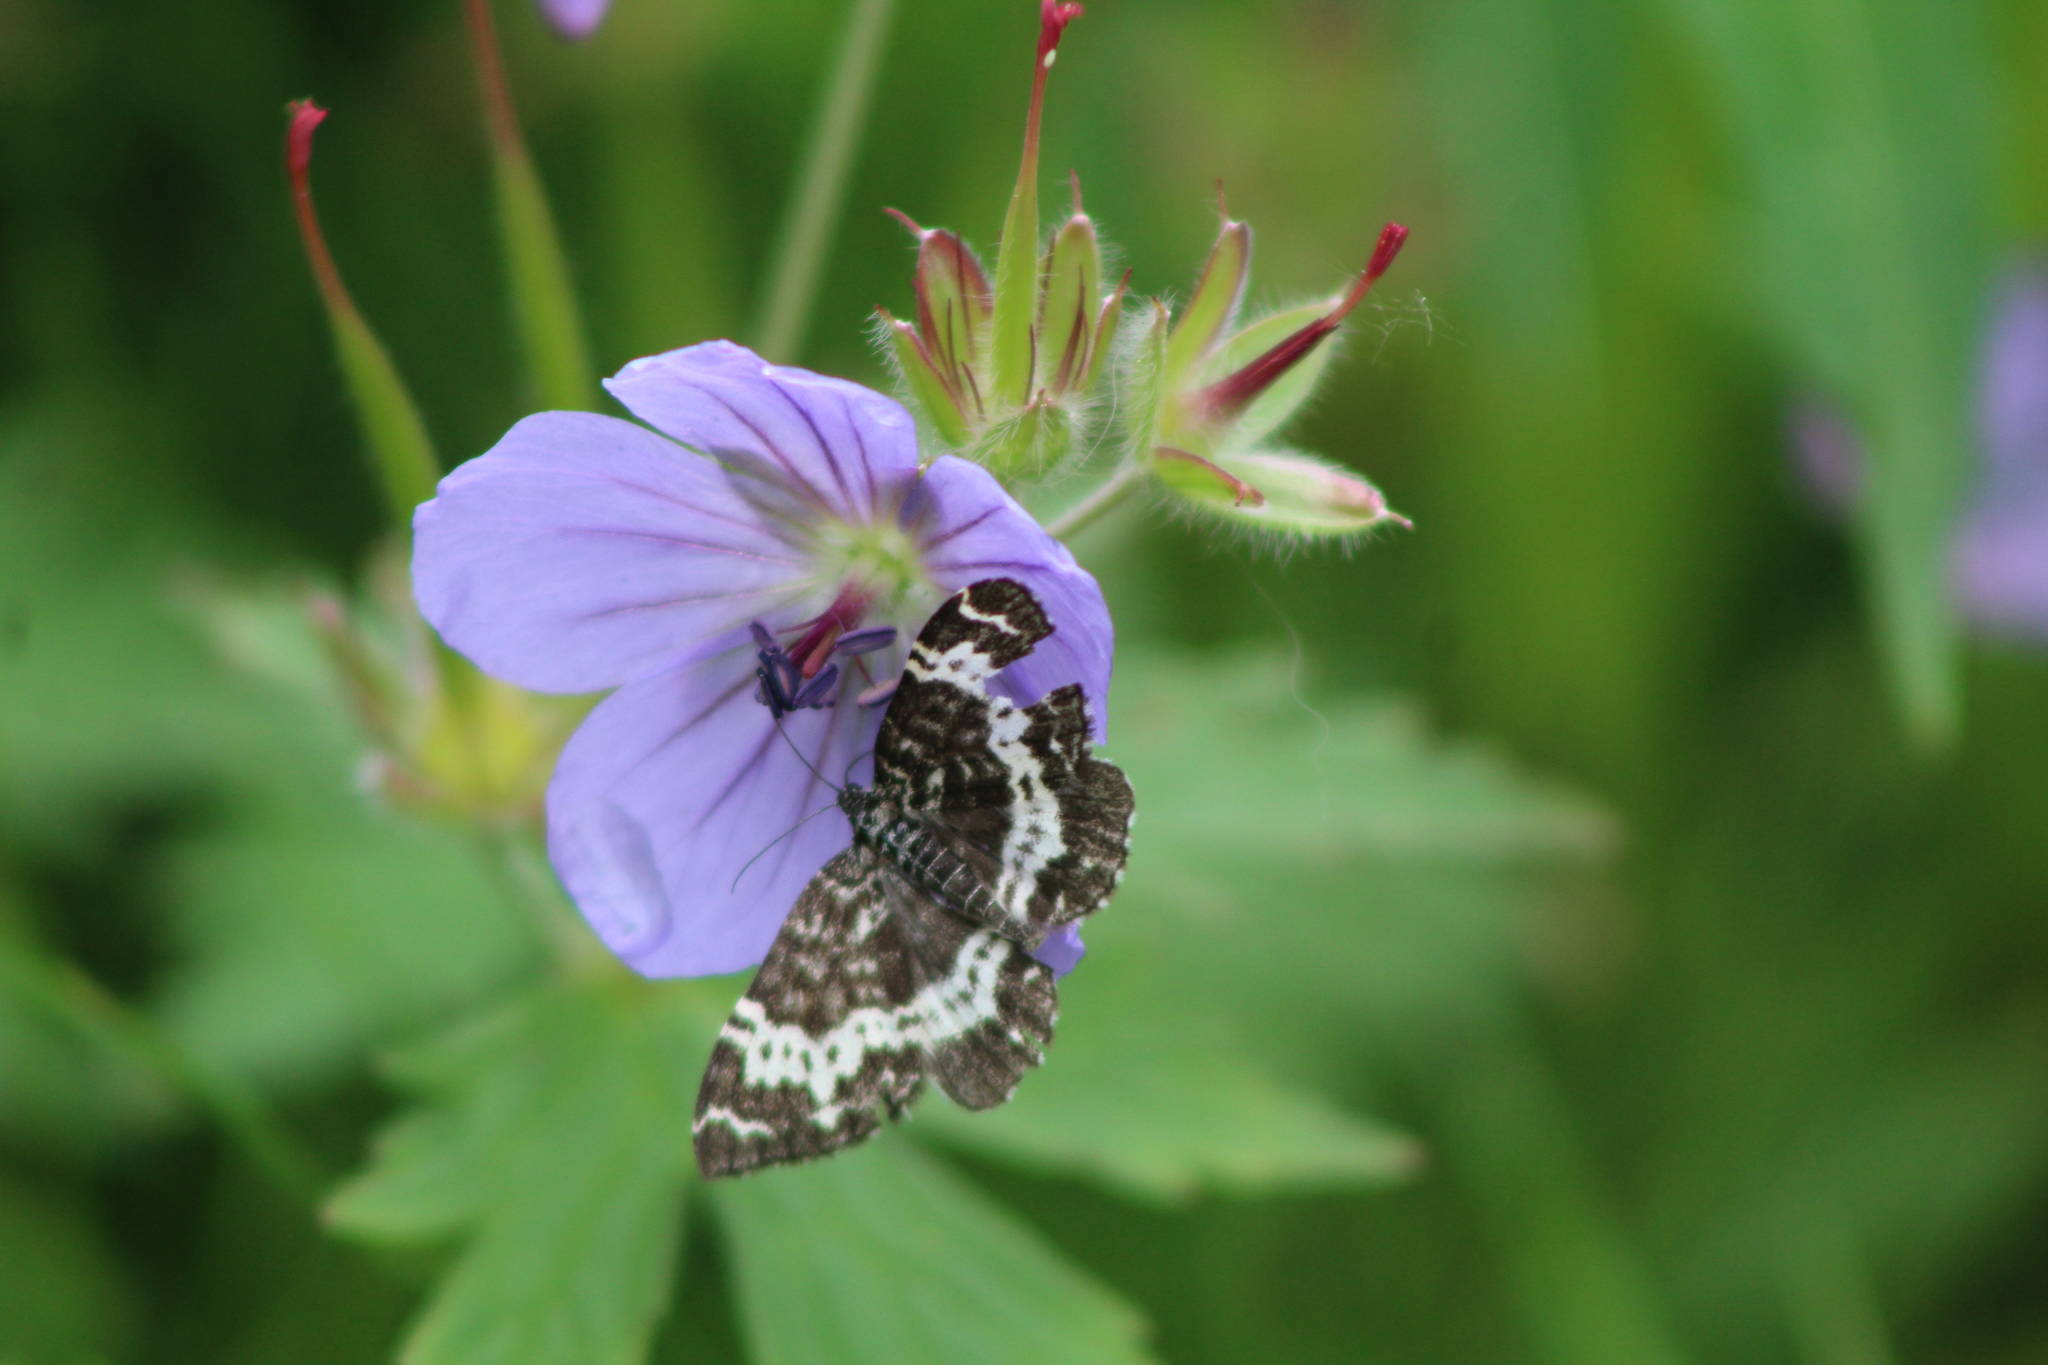 A geranium and friend are seen in this July 11 photo. (Courtesy Photo | Carolyn Kelley)